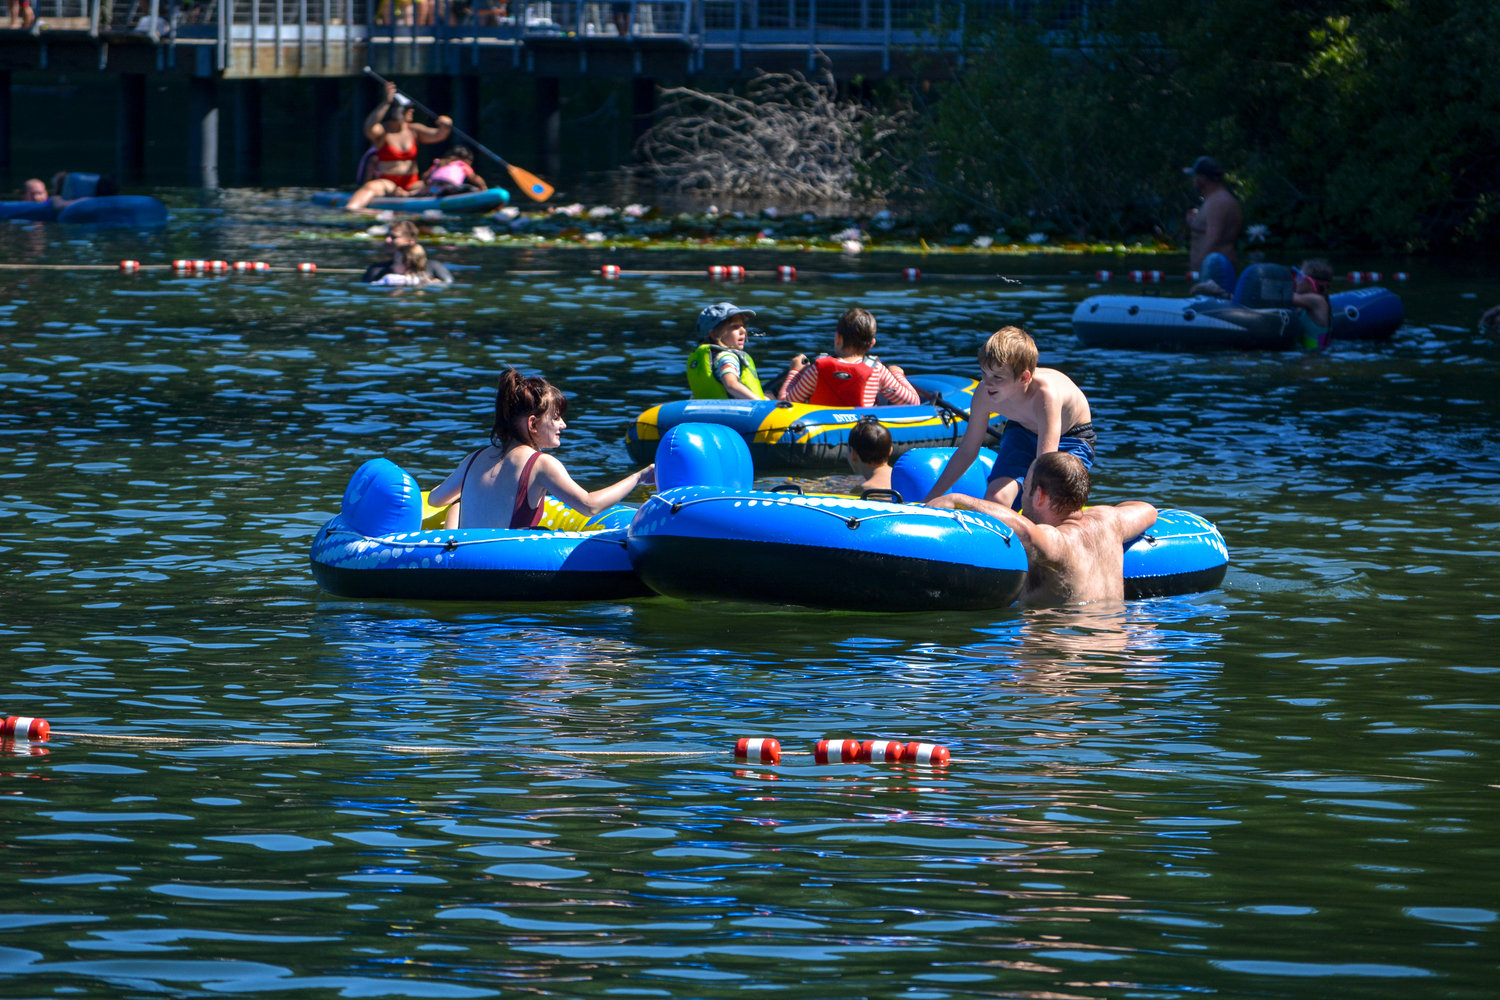 The National Weather Service recorded temperatures as high as 112 degrees in Vancouver on Sunday. People filled the beach and swimming areas of Battle Ground Lake State Park during the heatwave.